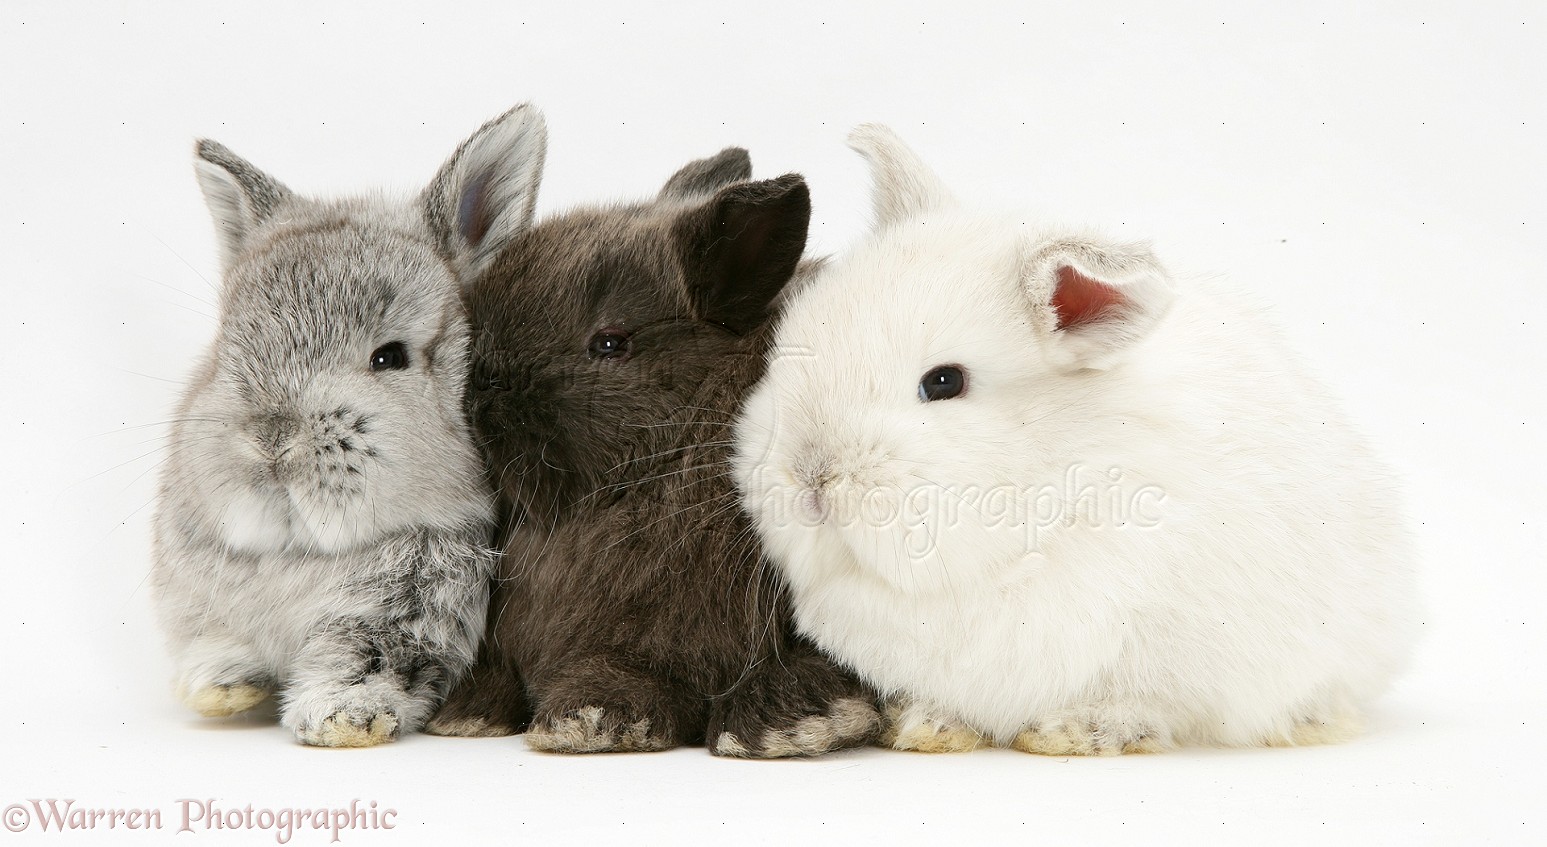 Horse Of Course And Rabbits Too Cute pictures of baby rabbits